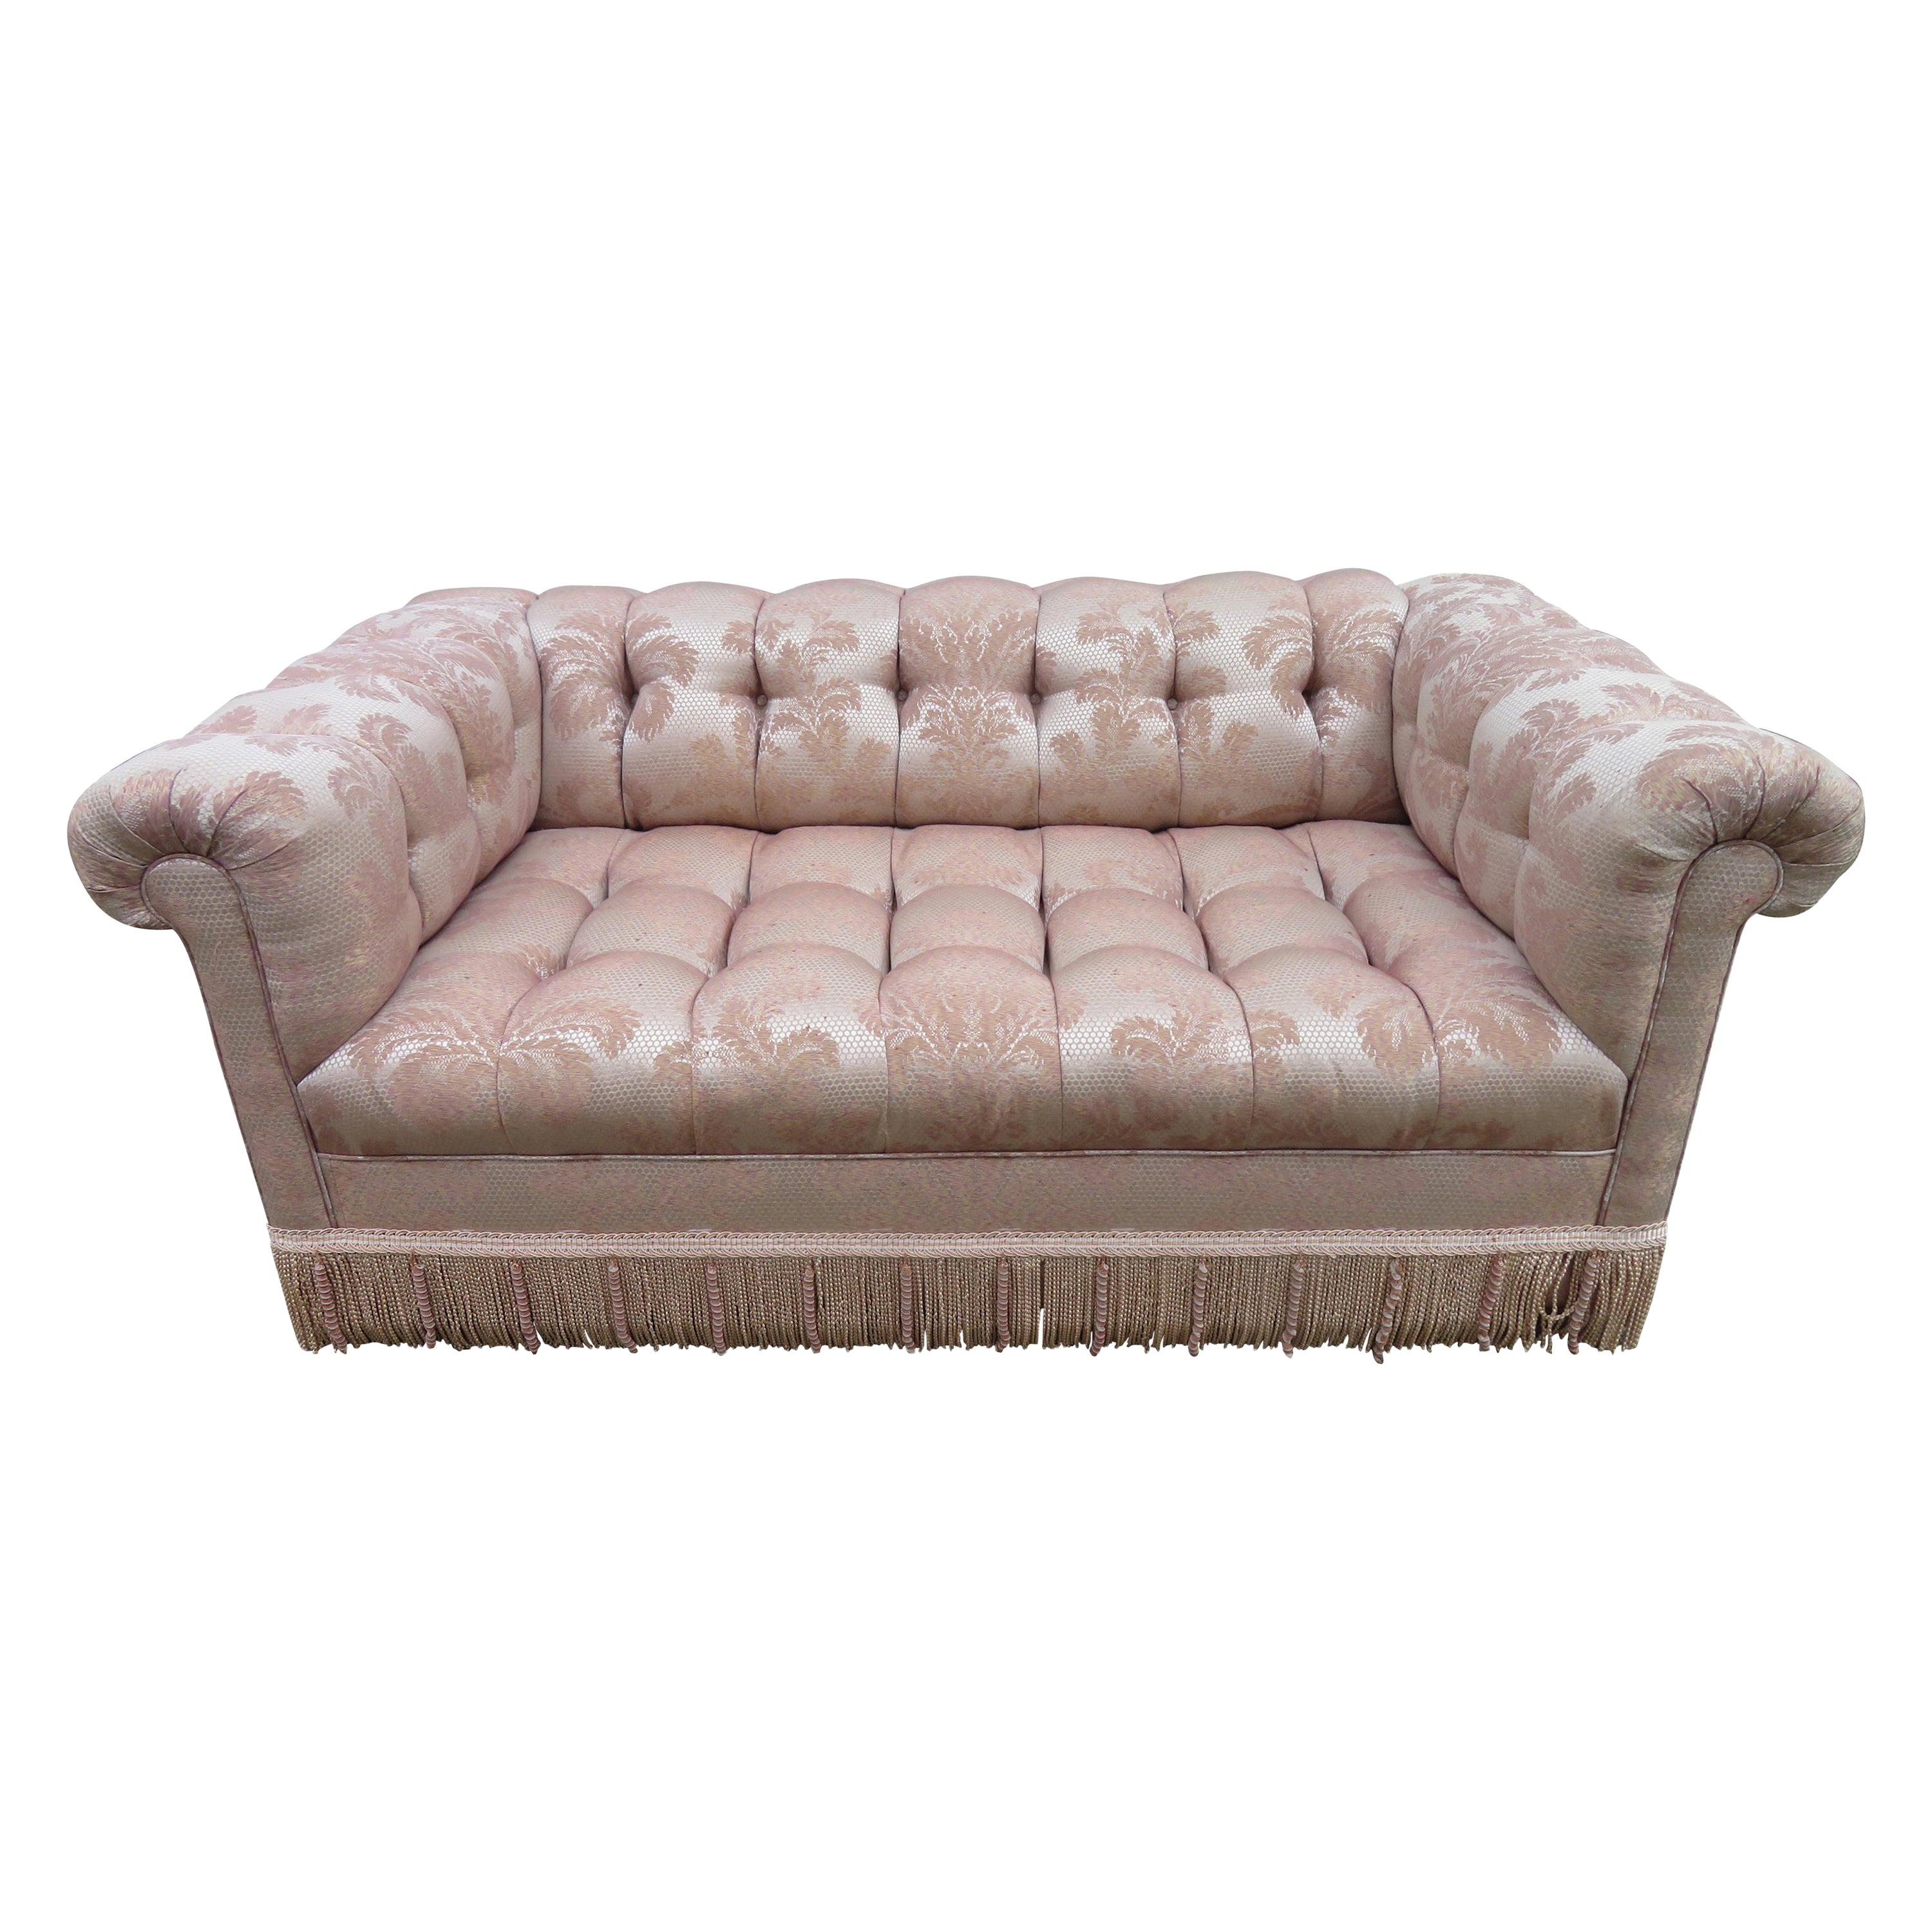 Magnificent Directional Biscuit Tufted Party Loveseat Sofa Modern For Sale